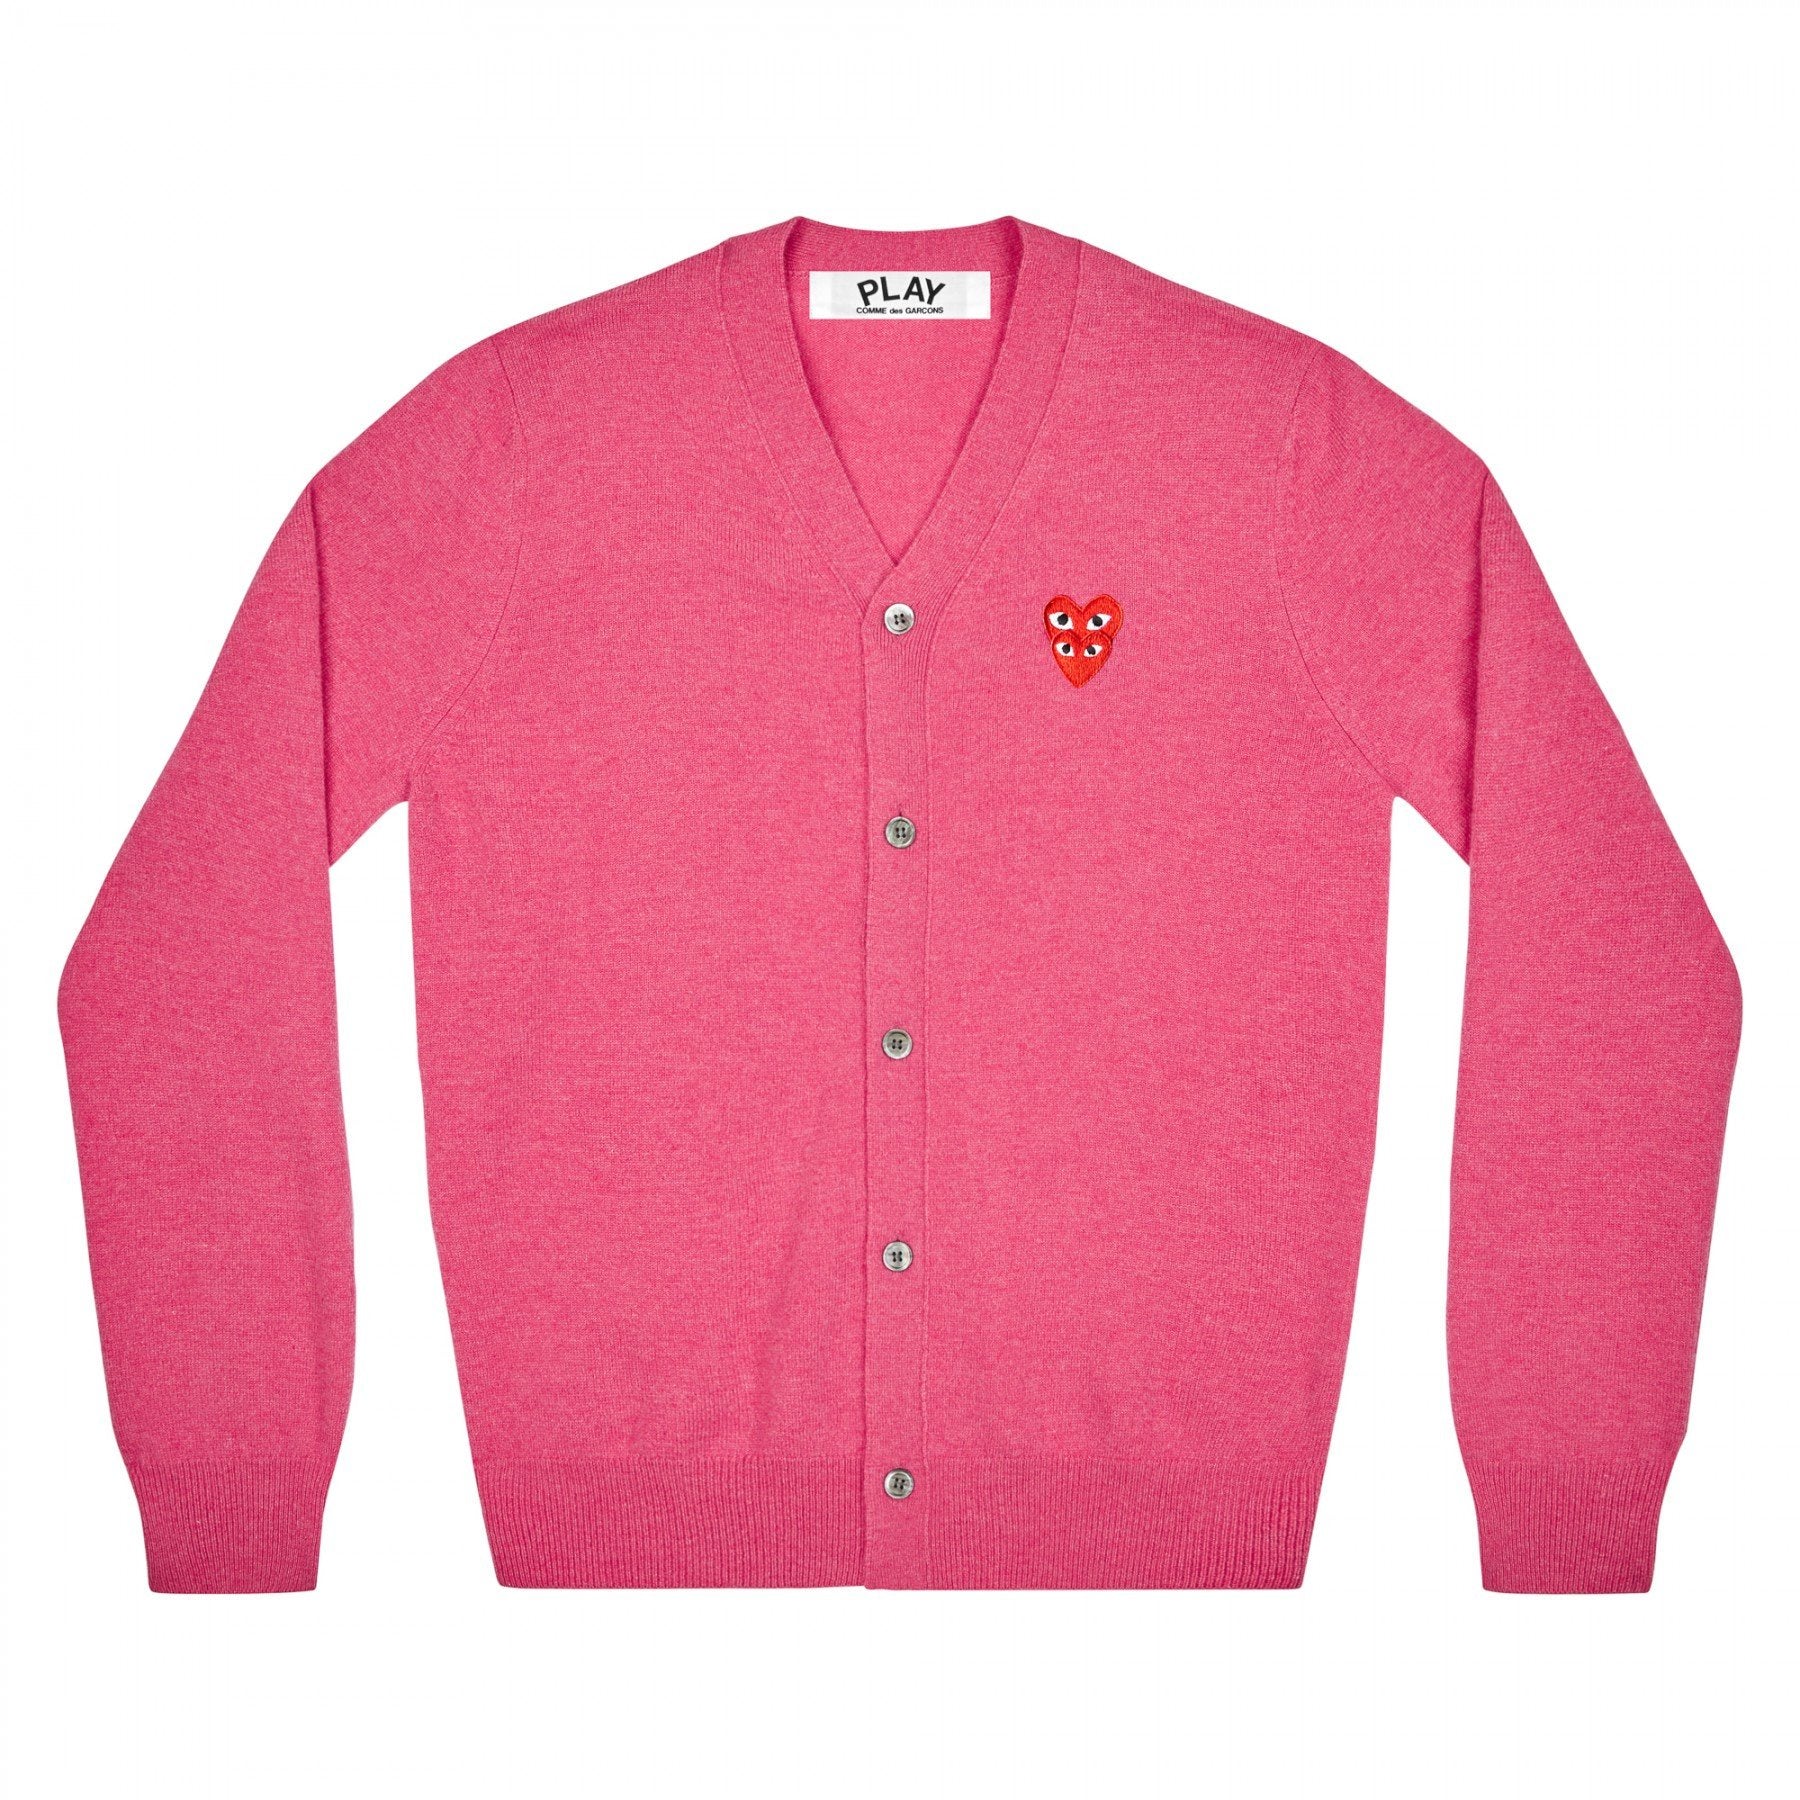 PLAY Men's Cardigan with Red Family Heart (Pink)